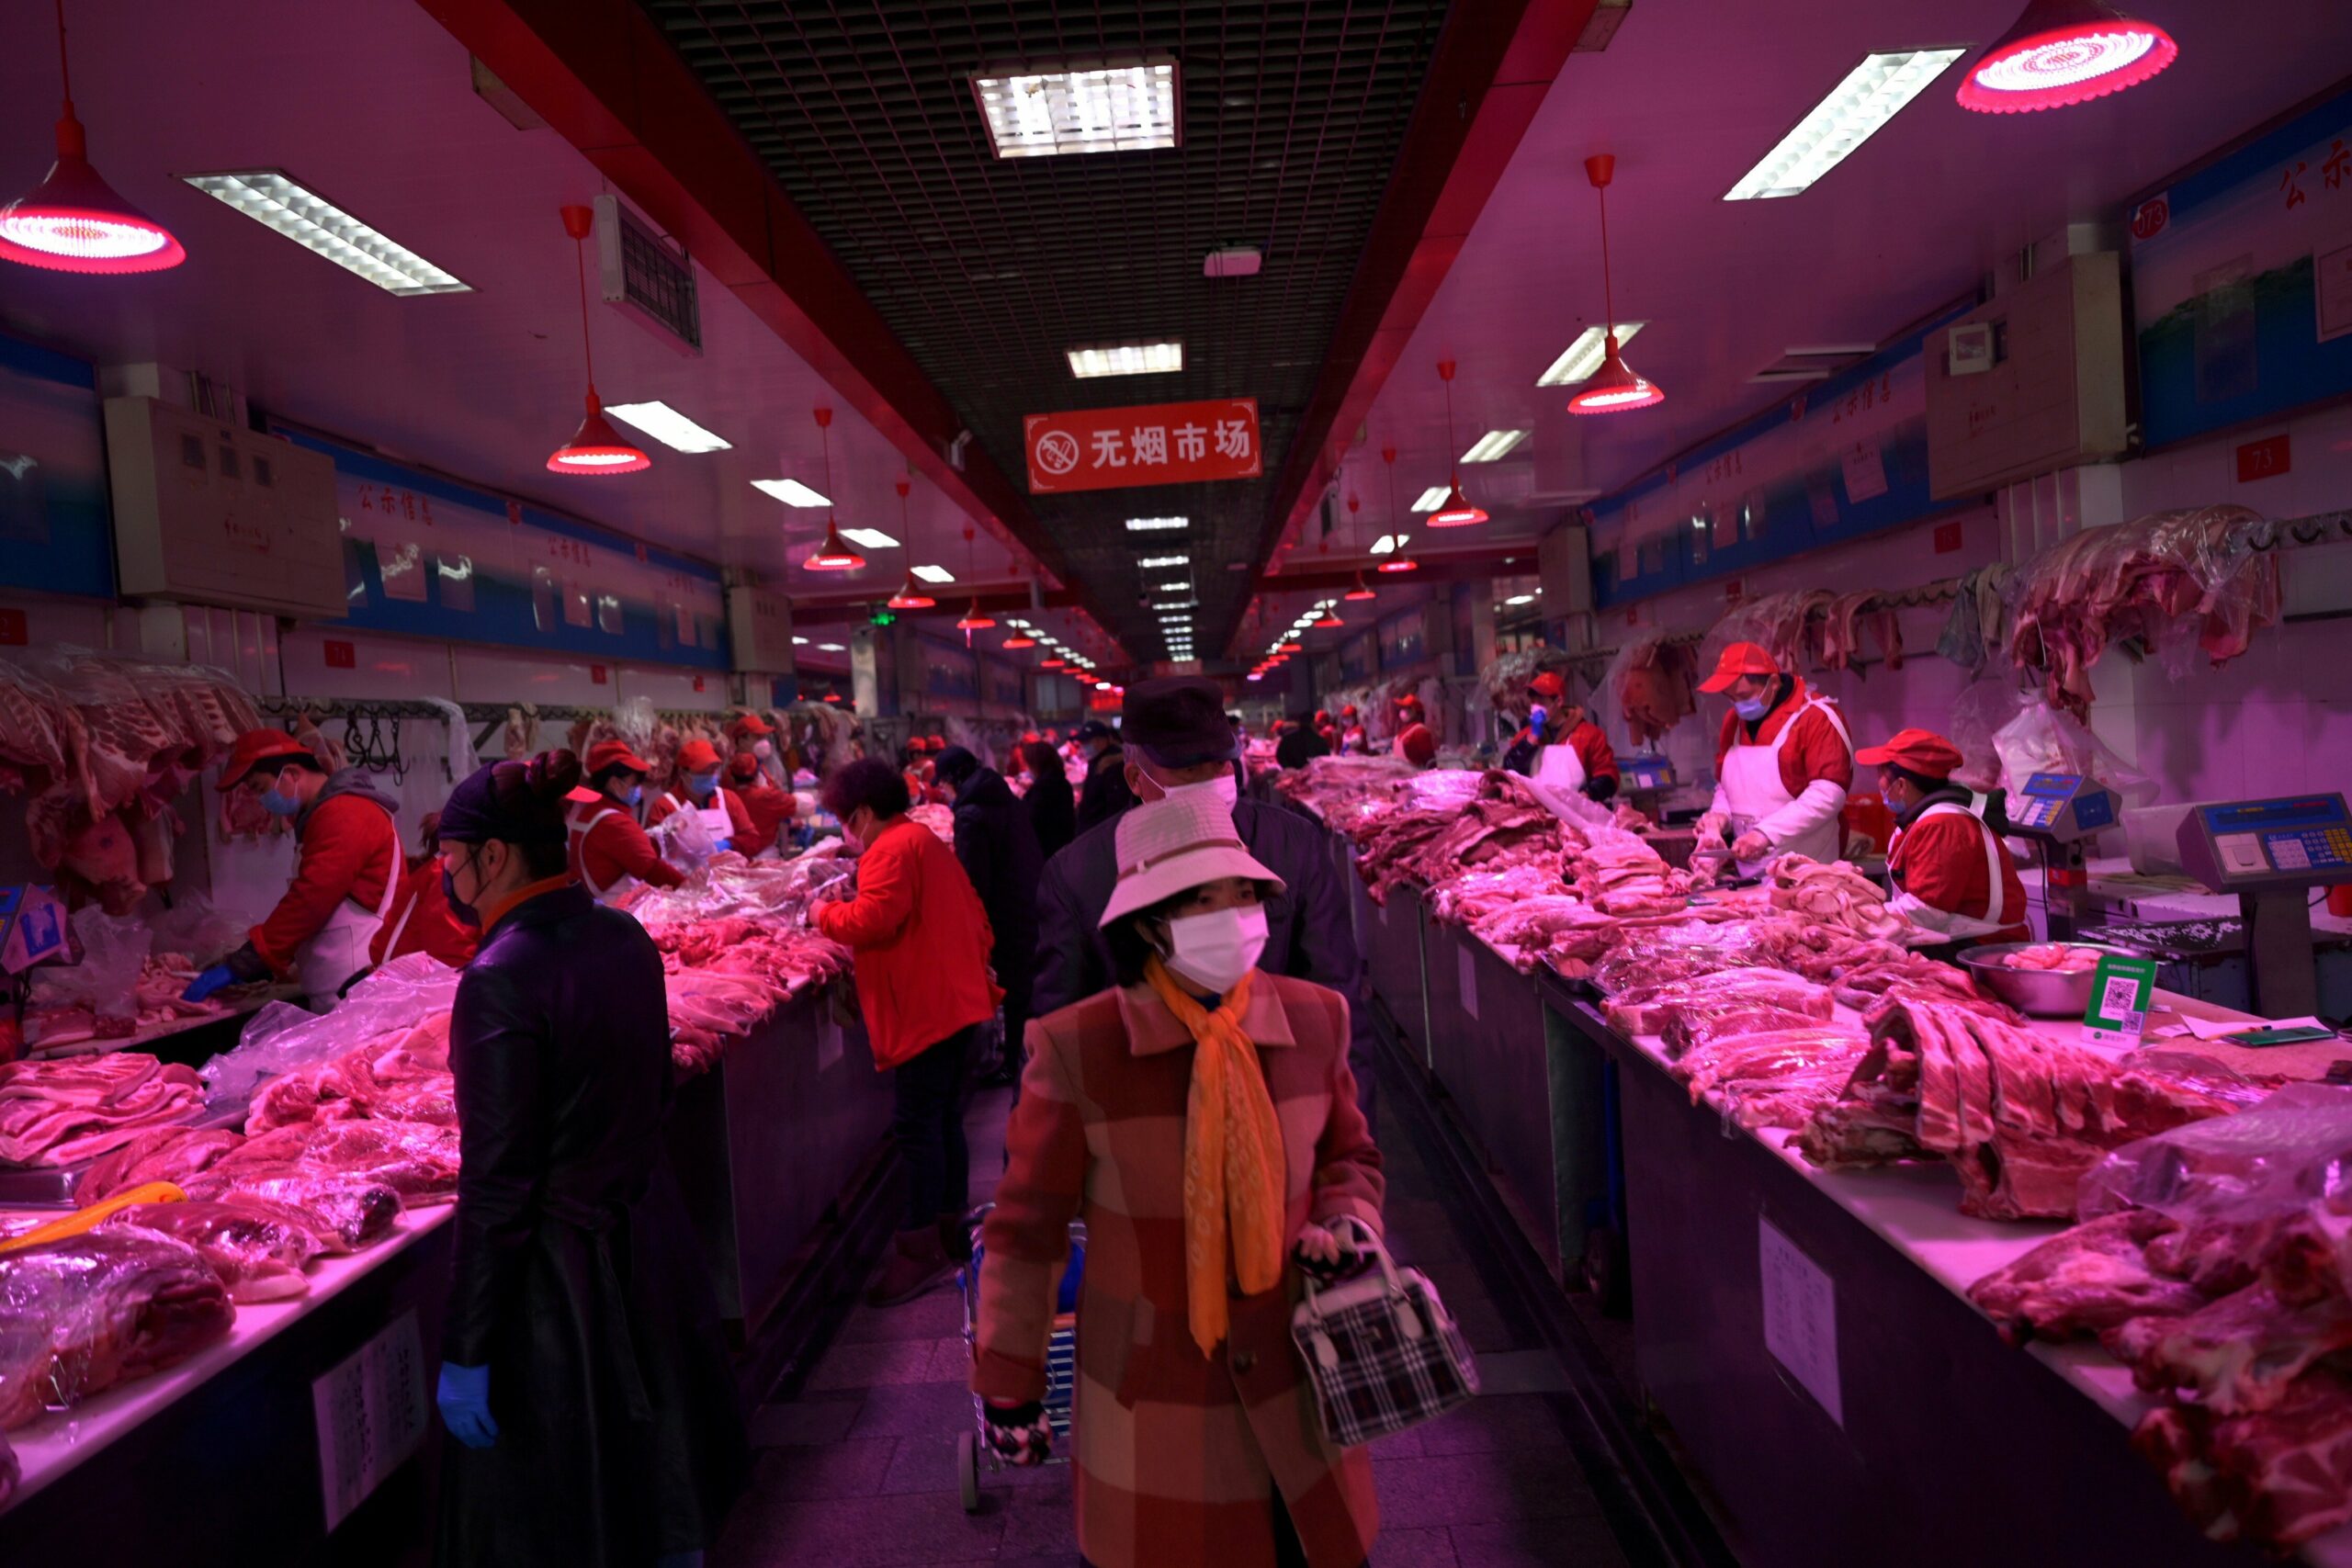 Warning! Scientists Find 18 High-Risk Viruses at China’s Wet Markets